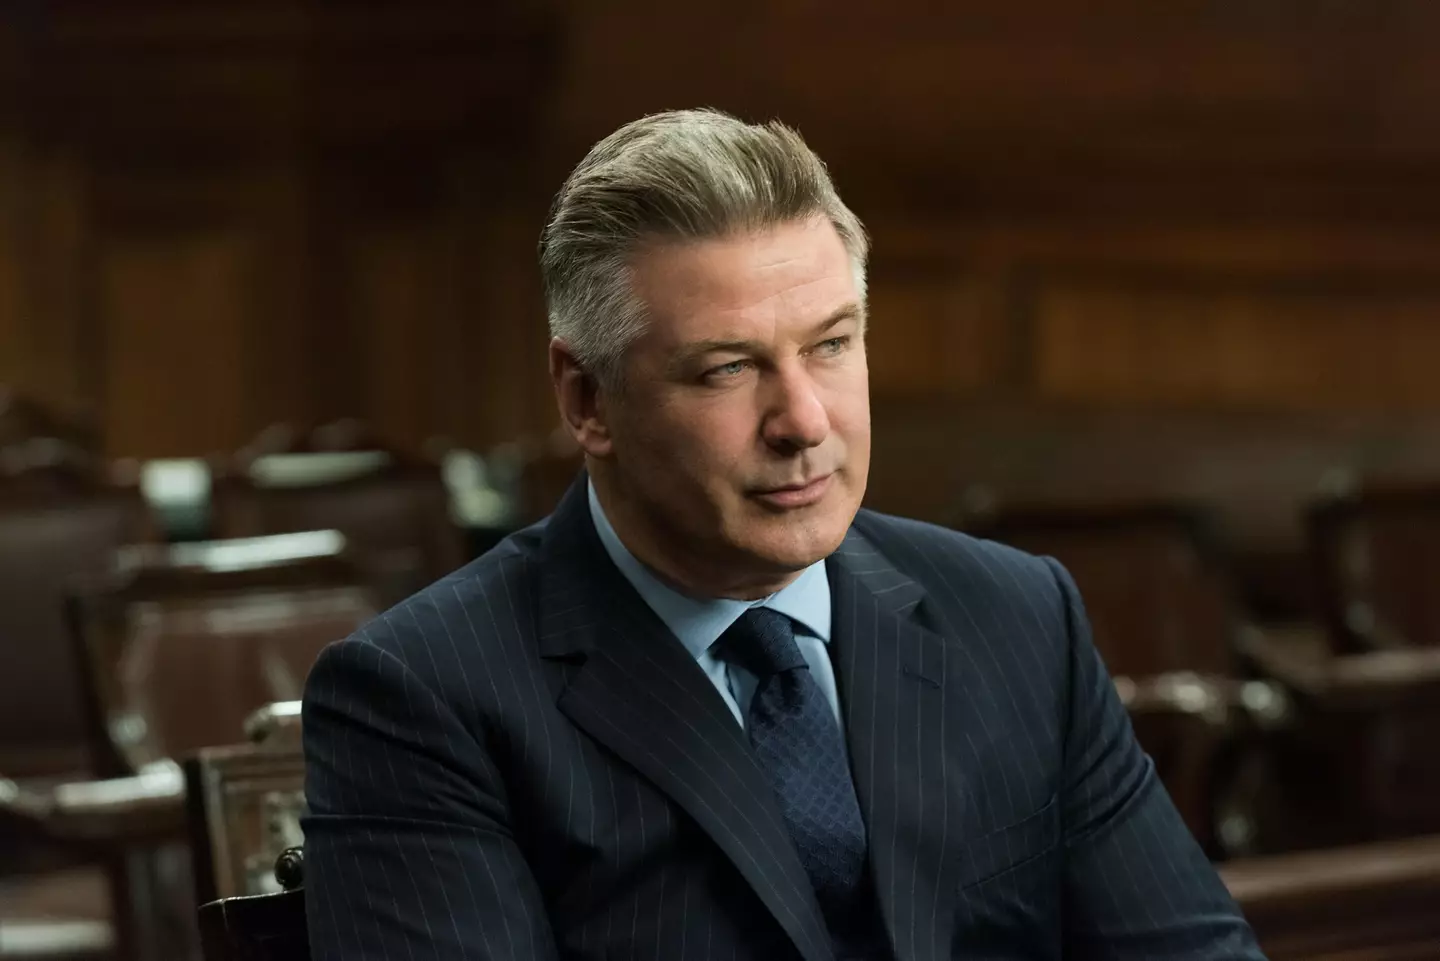 Alec Baldwin has also filed a lawsuit against a number of people involved in the film.